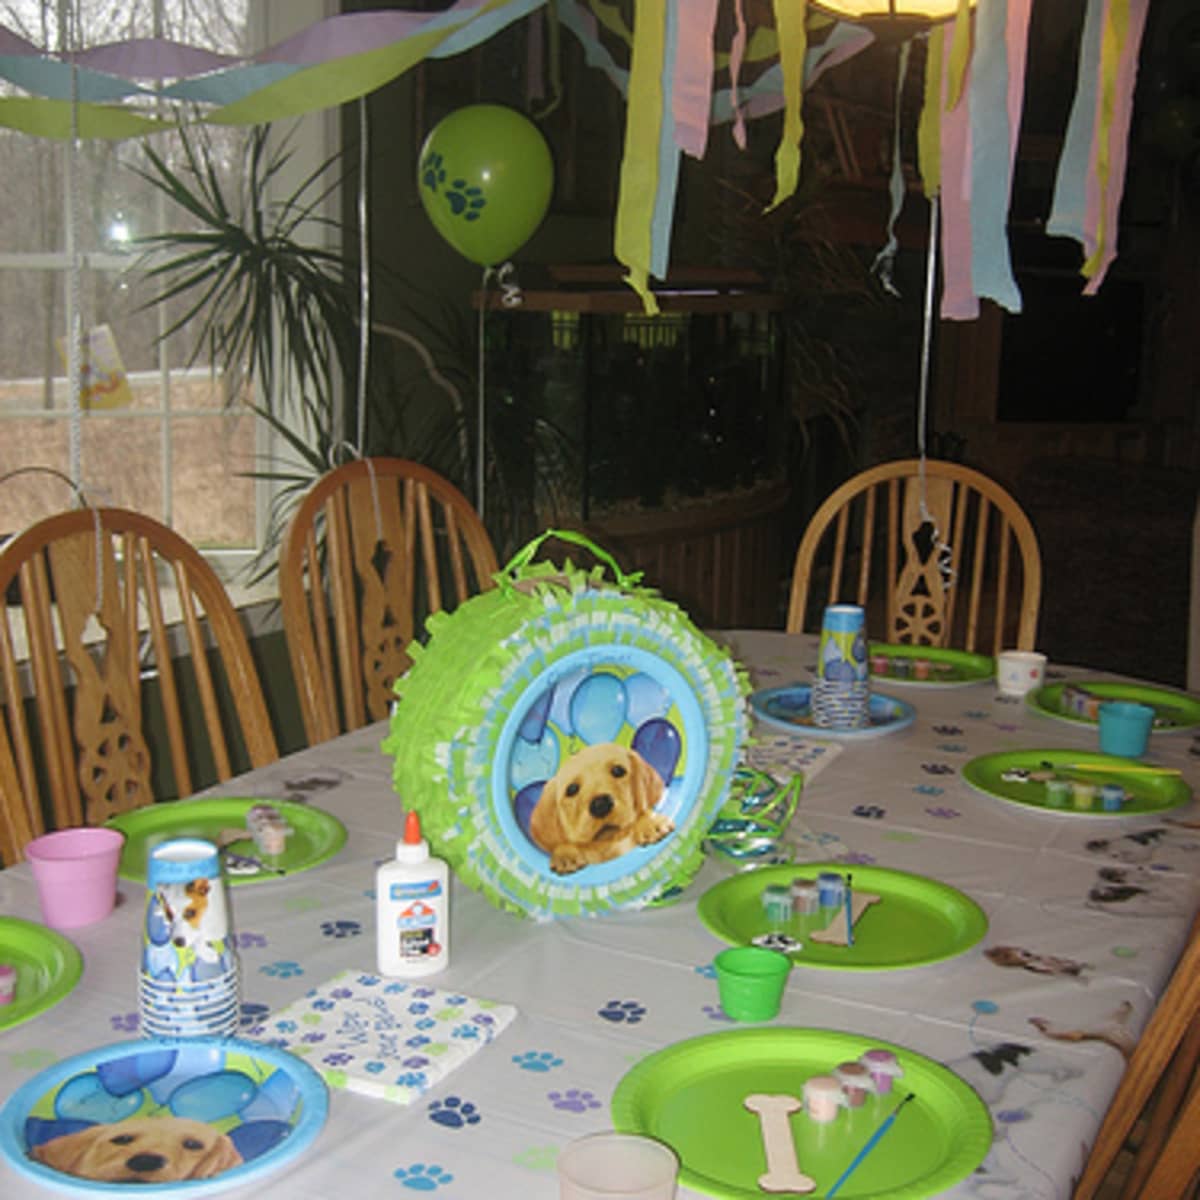 M & M Birthday Party - HubPages